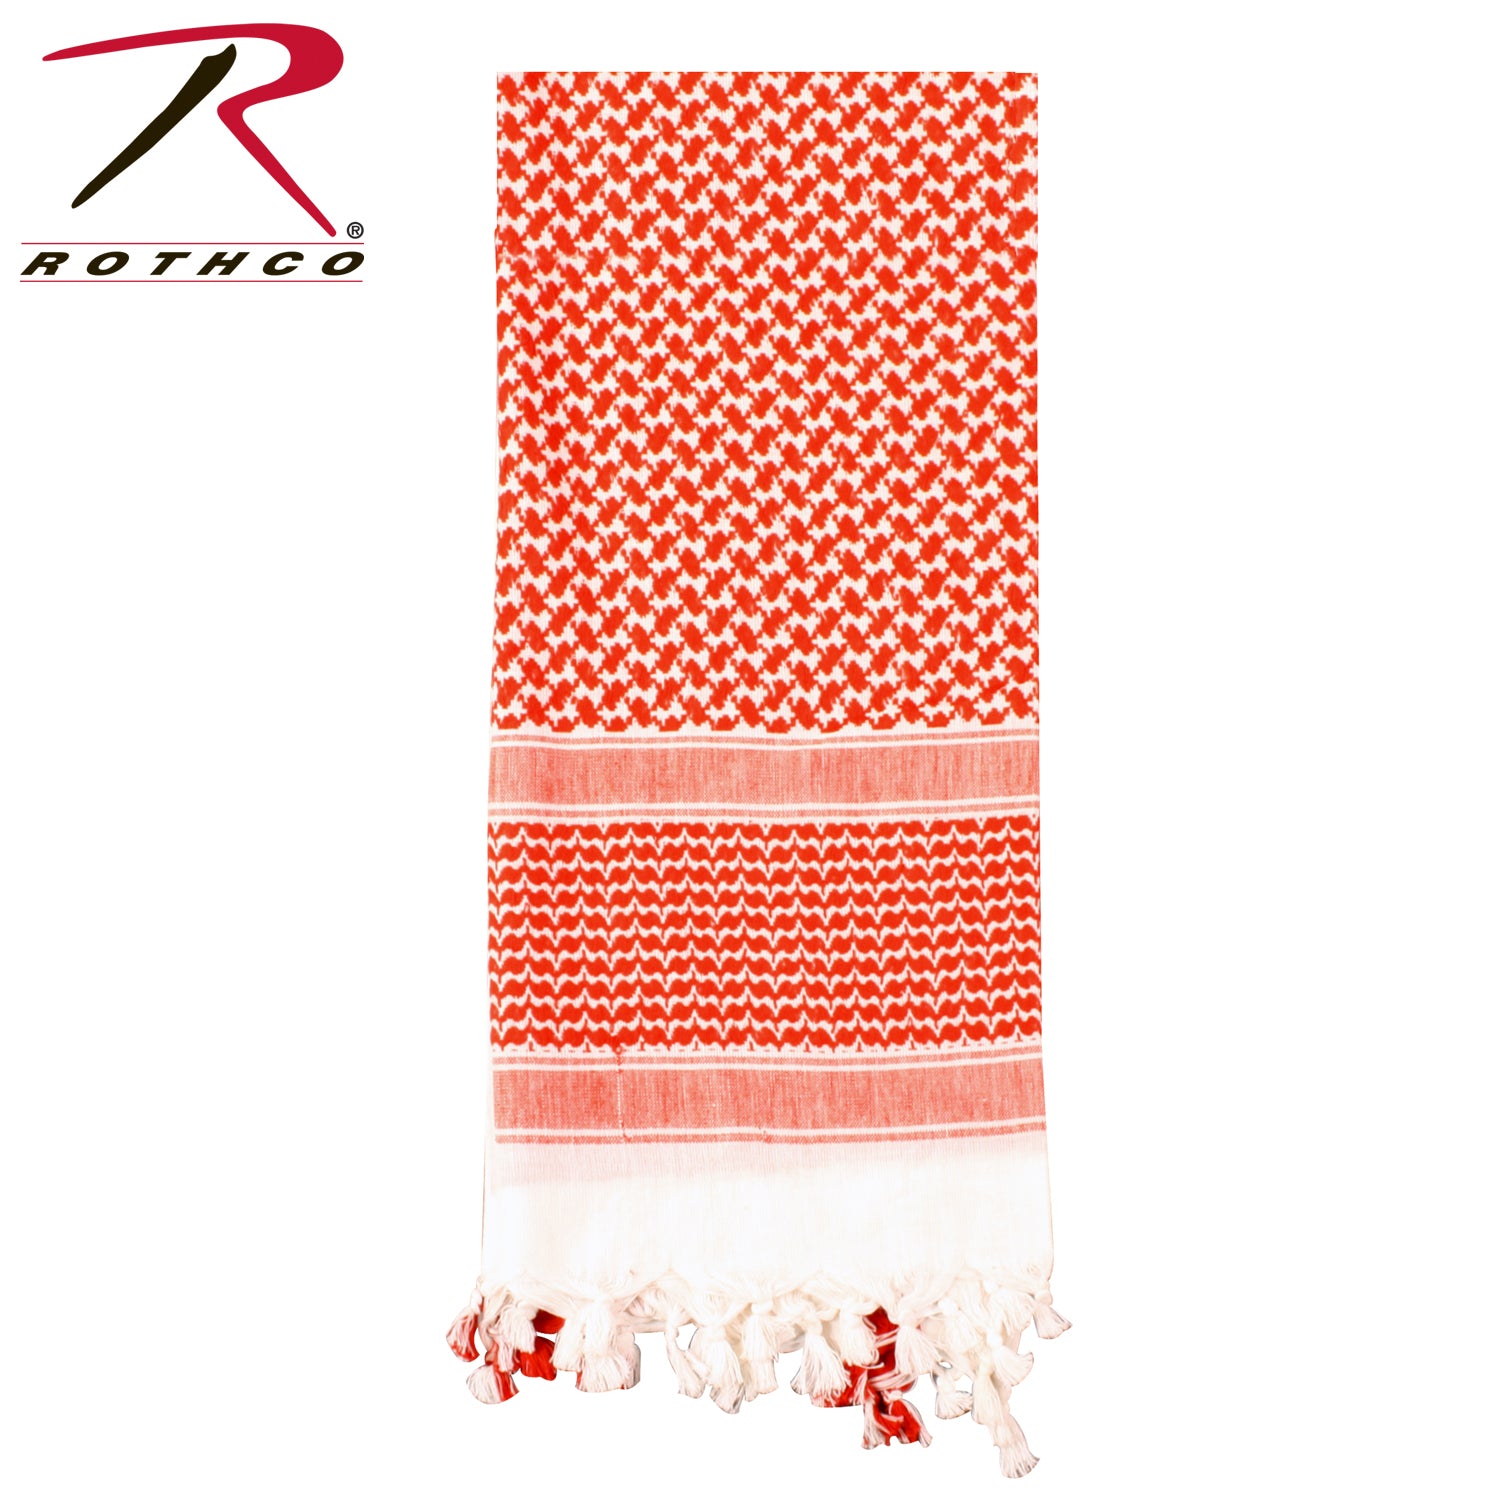 Rothco Lightweight Shemagh Tactical Desert Keffiyeh Scarf - Eminent Paintball And Airsoft